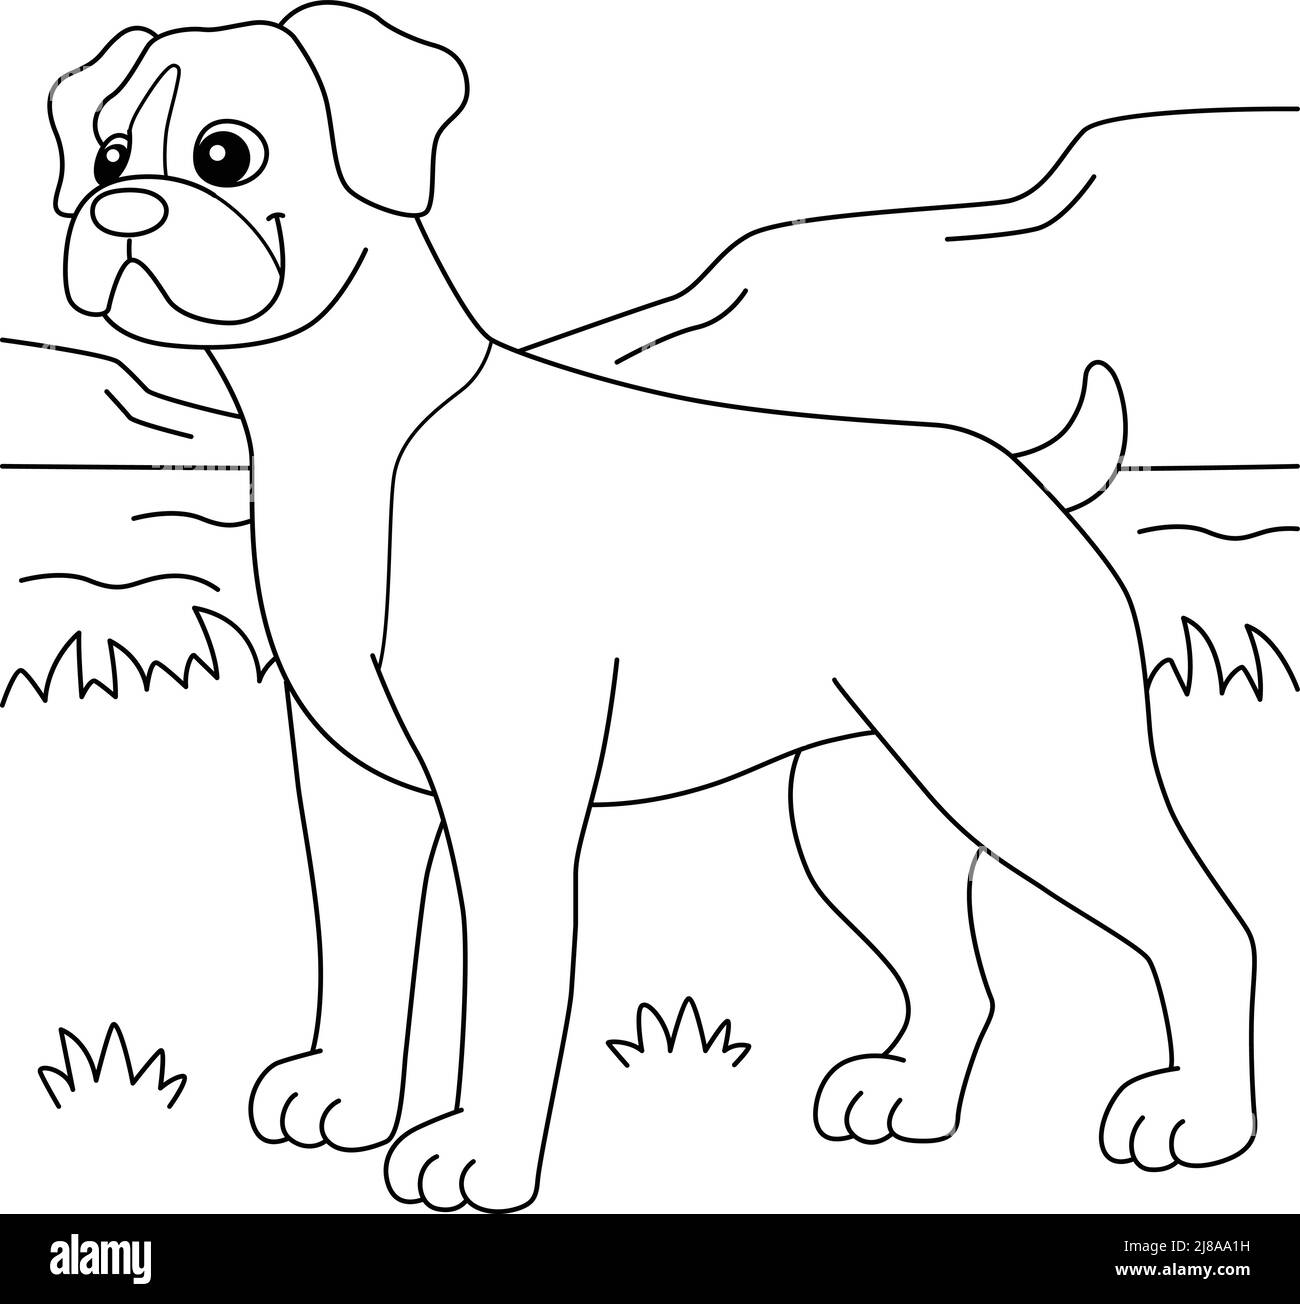 Boxer Dog Coloring Page for Kids Stock Vector